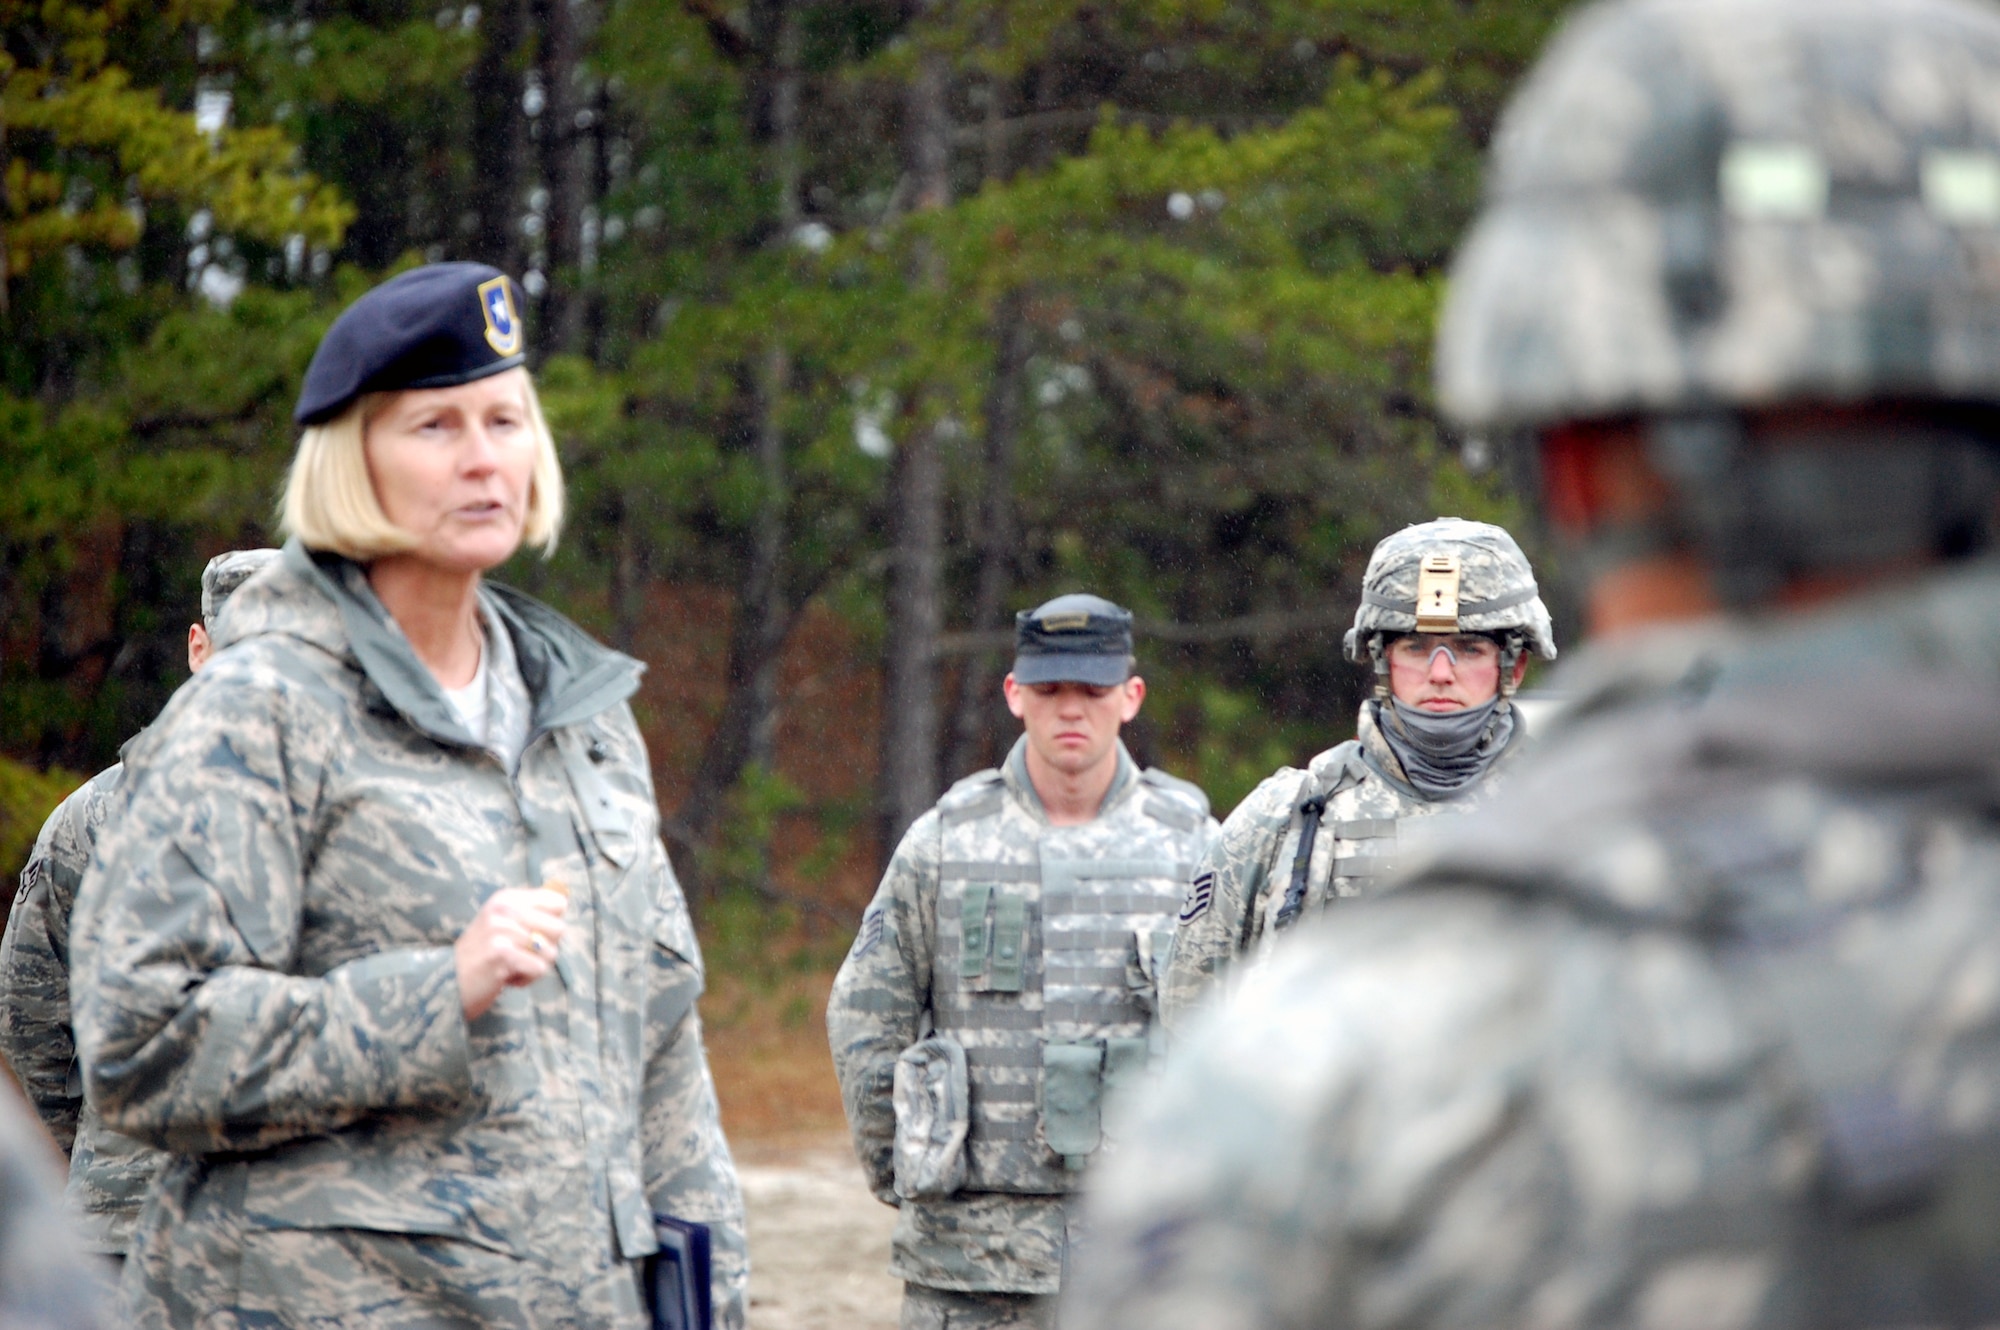 Brig. Gen. Mary Kay Hertog, the Air Force Director of Security Forces at the Pentagon in Arlington, Va., talks with security forces Airmen in training on a Fort Dix, N.J., range on March 26, 2009.  General Hertog was visiting with the students as part of a visit to the U.S. Air Force Expeditionary Center, also on Fort Dix.  General Hertog is the first female security forces officer to hold the top Air Forces security forces post and held a video-teleconferenced briefing to more than 15 locations world-wide as part of a professional speaker series at the Expeditionary Center.  (U.S. Air Force Photo/Tech. Sgt. Scott T. Sturkol)